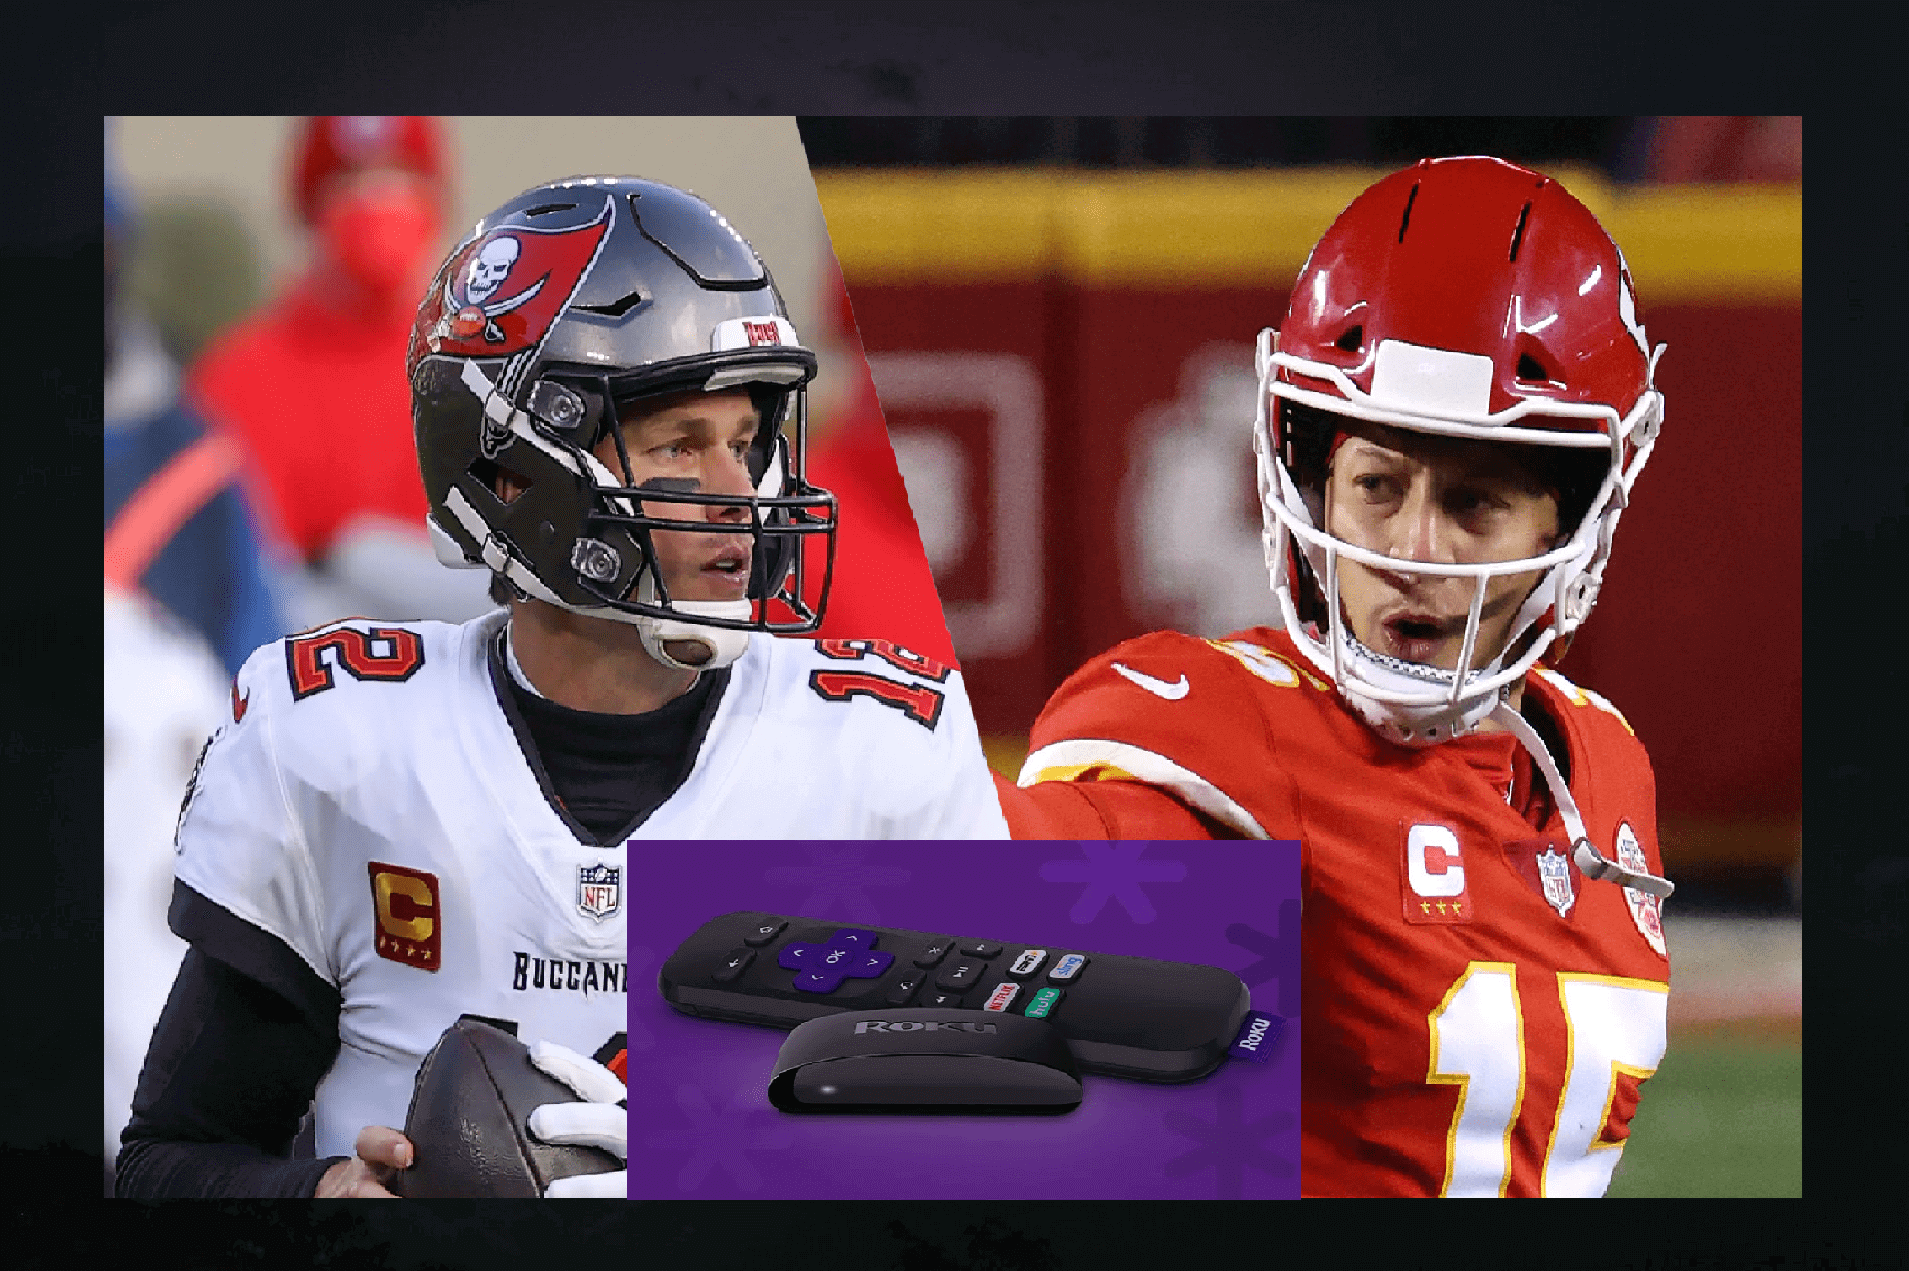 How to Watch the Super Bowl on Roku | Watch Superbowl Online Free